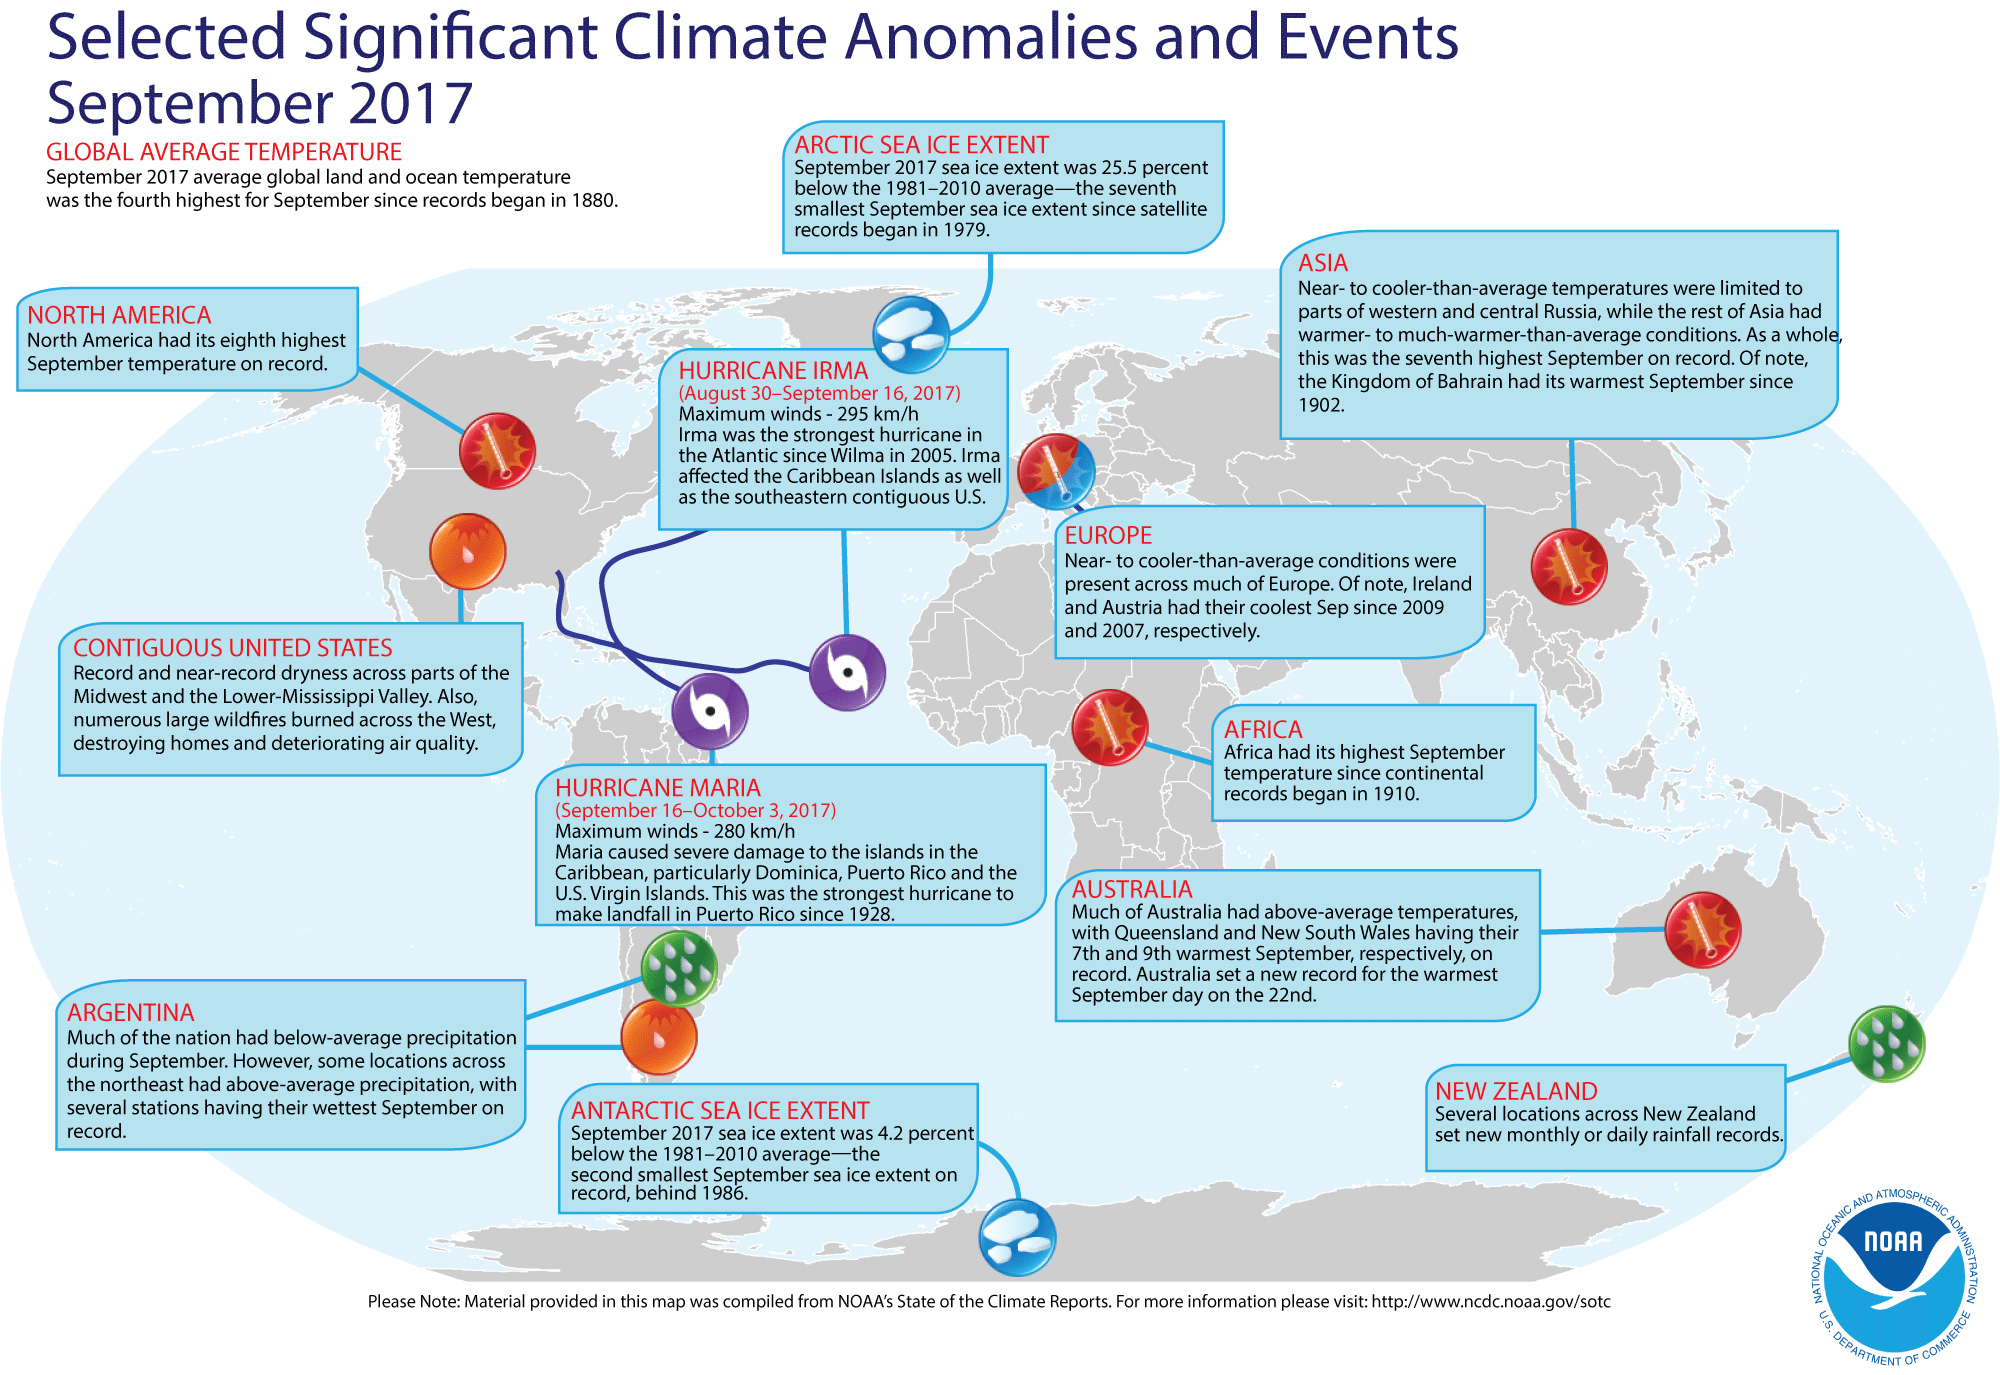 Here are some noteworthy climate events that occurred around the world in September.